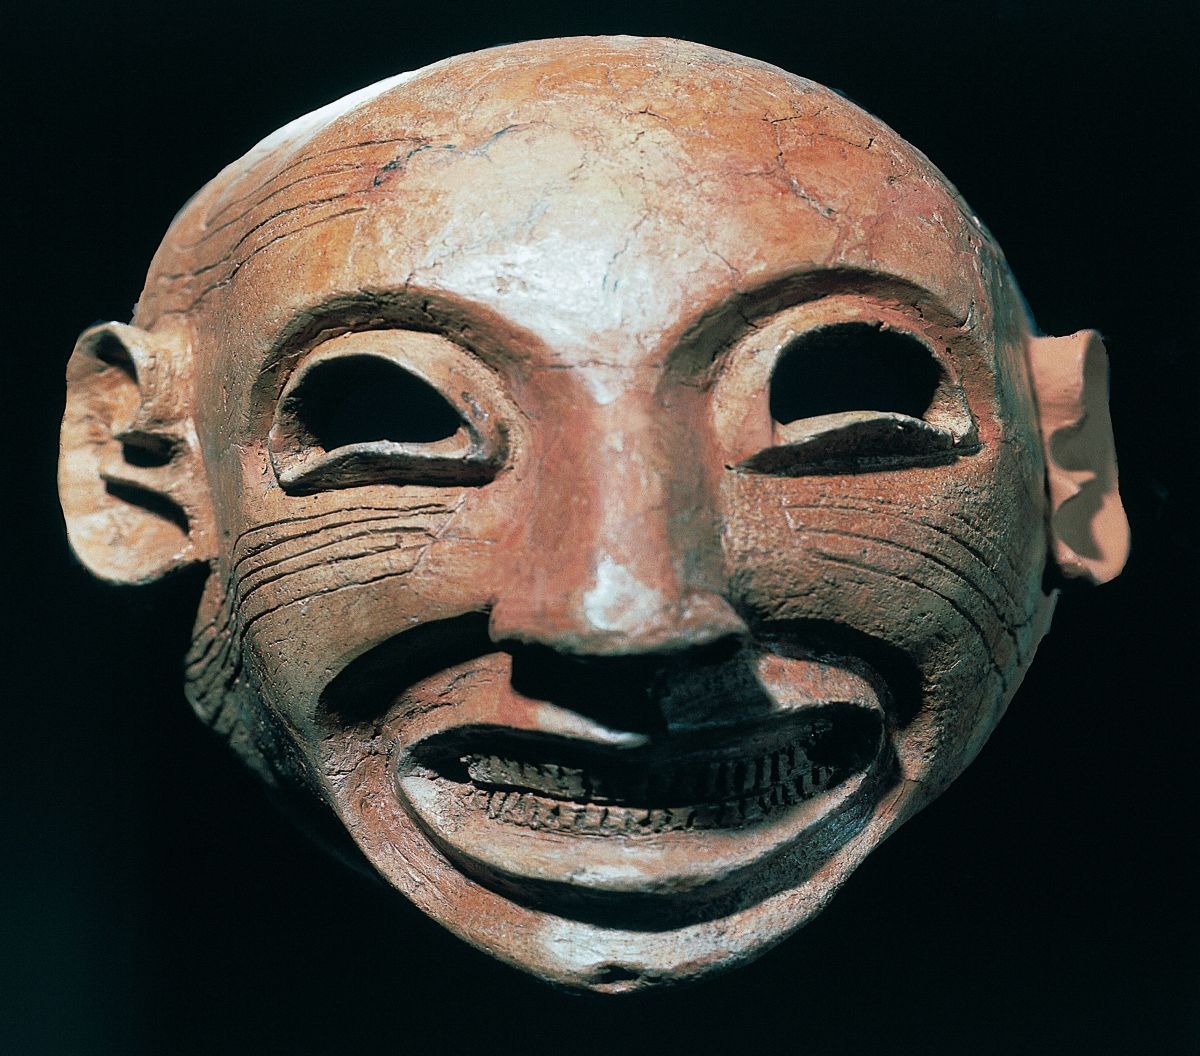 The Mysterious Phoenician Legend of the Sardonic Grin